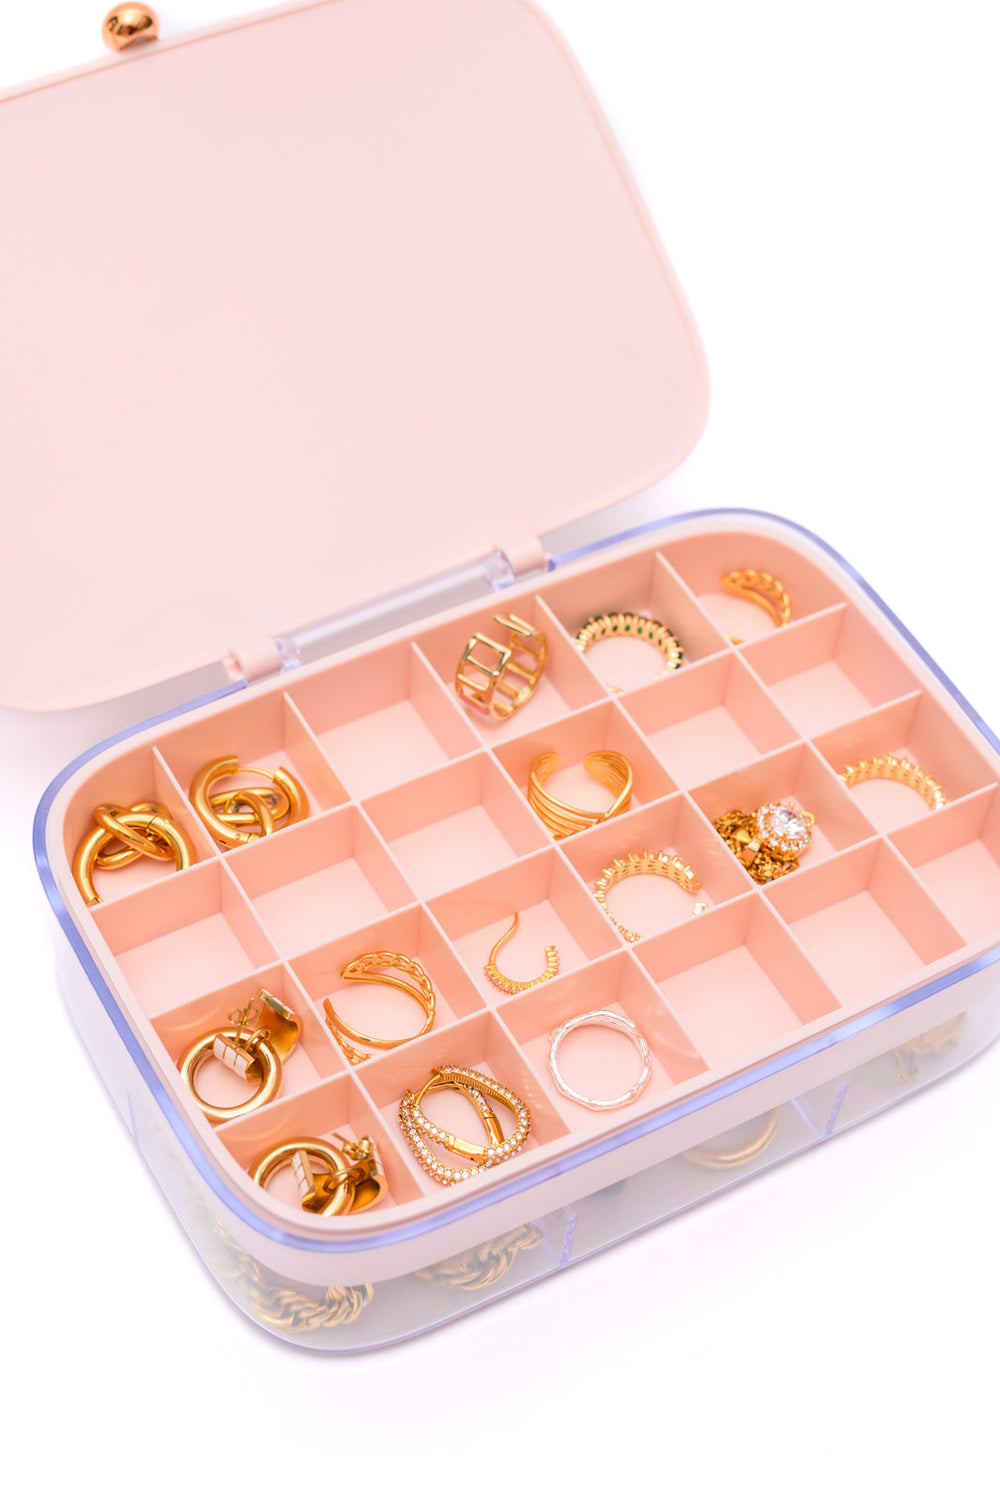 All Sorted Out Jewelry Storage Case in Pink-220 Beauty/Gift-Inspired by Justeen-Women's Clothing Boutique in Chicago, Illinois